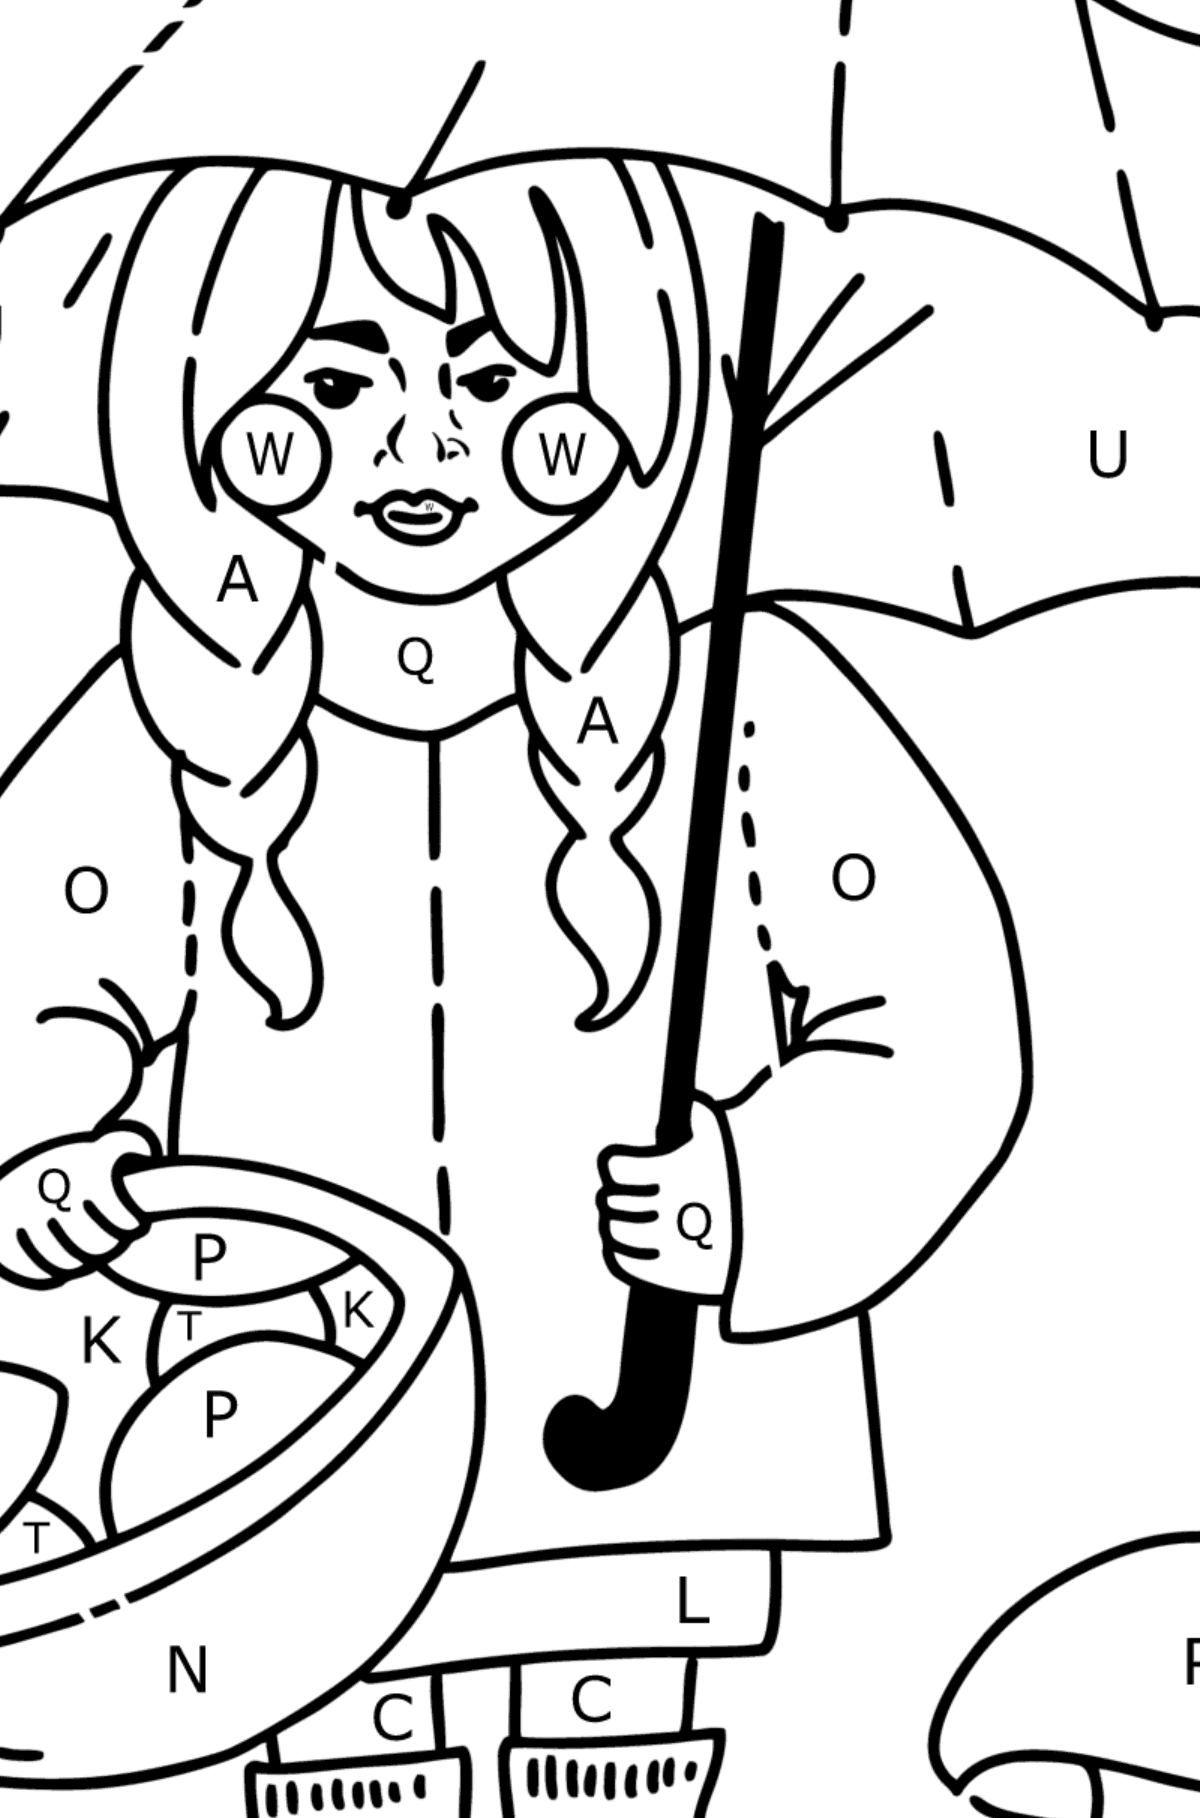 Coloring page - Girl picking mushrooms - Coloring by Letters for Kids